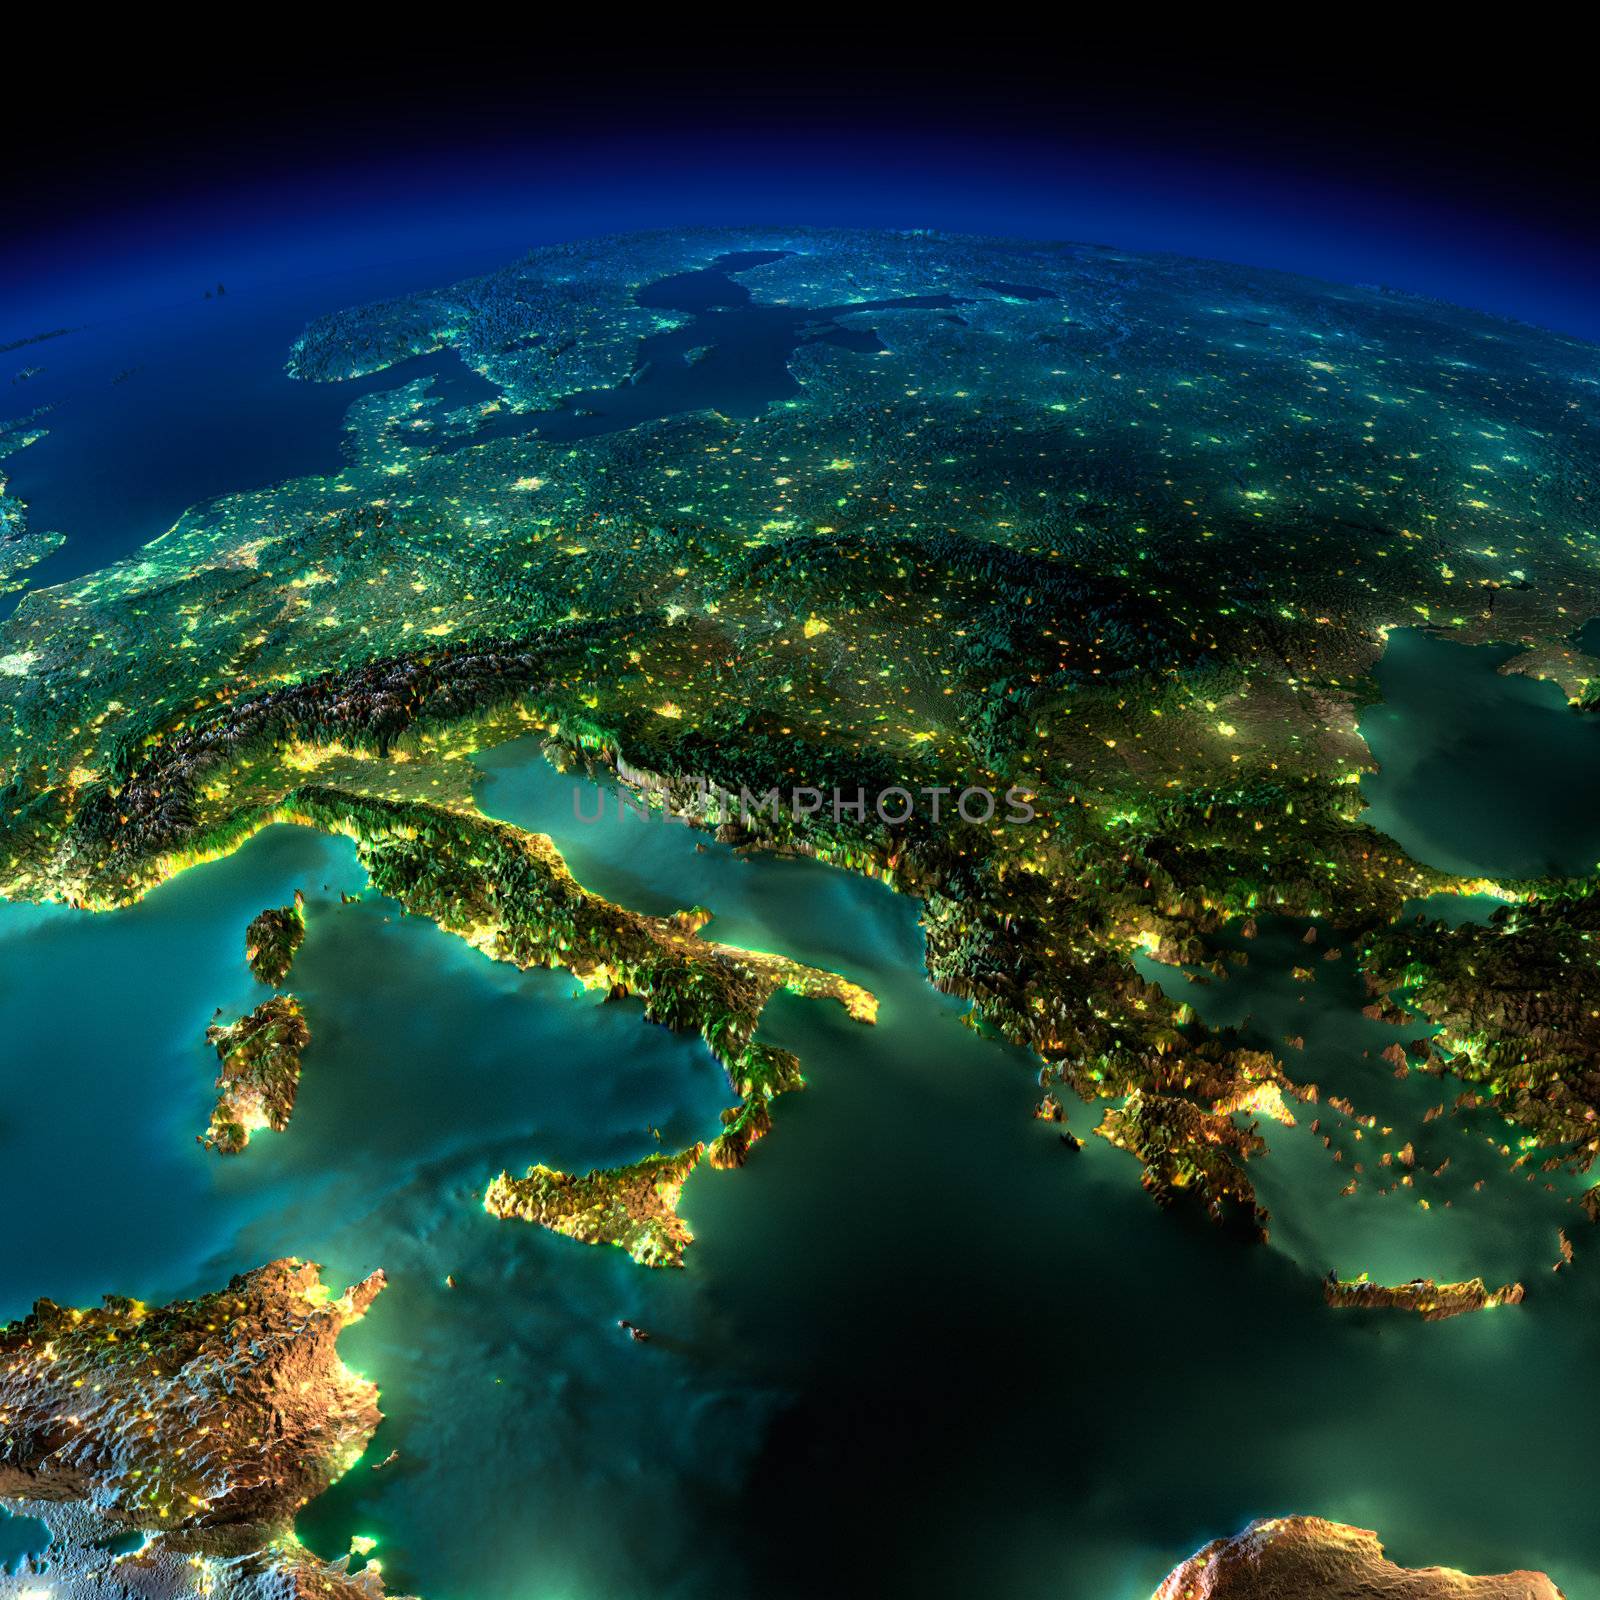 Night Earth. A piece of Europe - Italy and Greece by Antartis